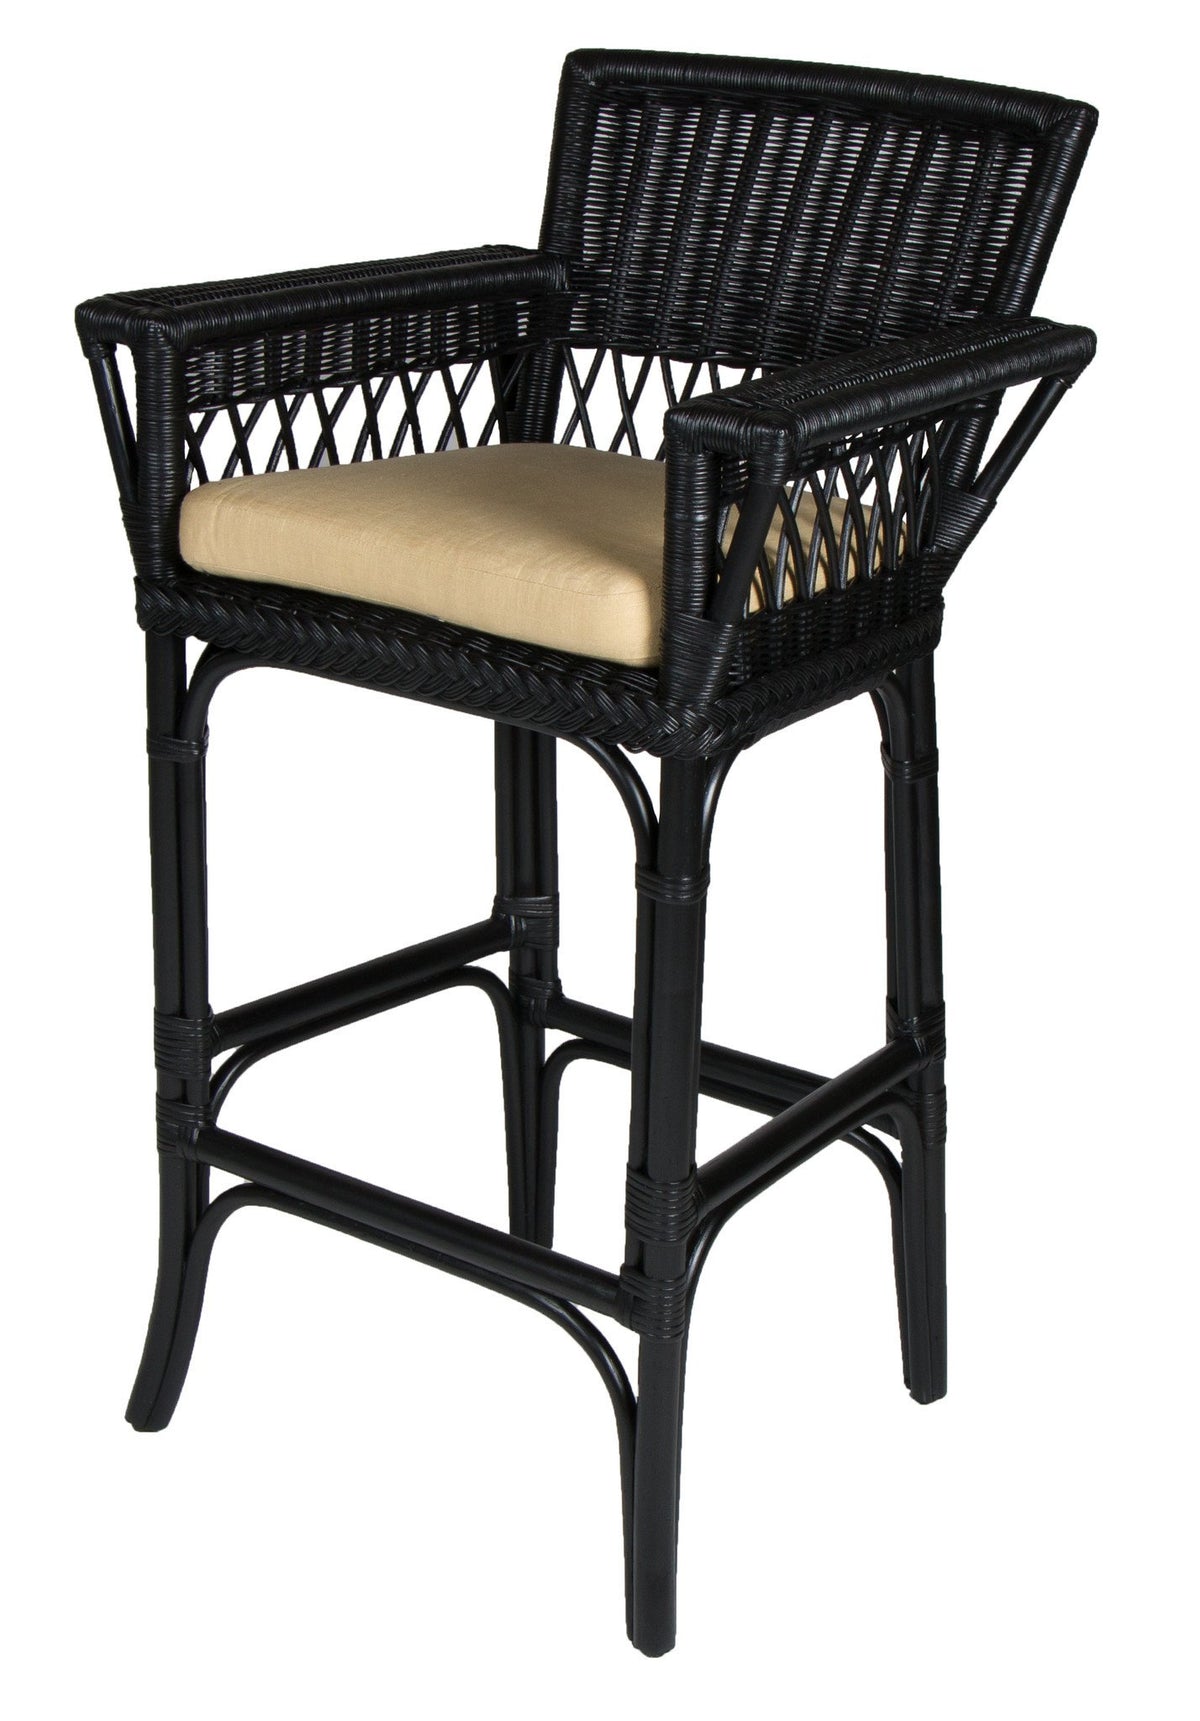 Designer Wicker &amp; Rattan By Tribor Windsor Barstool With Arm by Design Wicker from Tribor Bar Stool - Rattan Imports